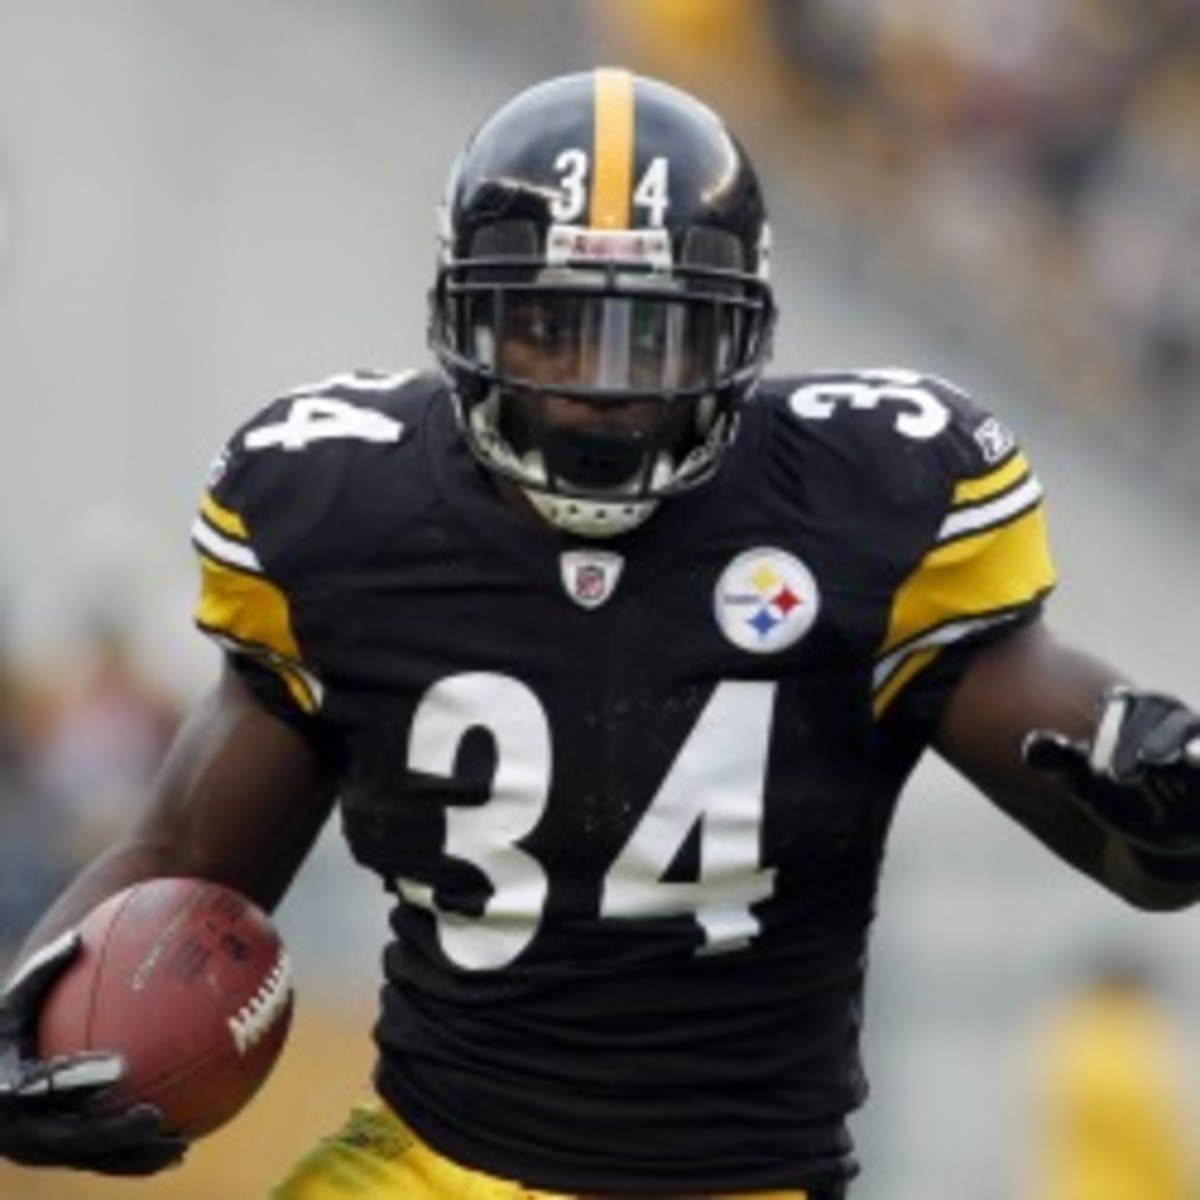 Running back Rashard Mendenhall has rushed for 3,549 career yards, but struggled with injury and fumbling problems last season. (Justin K. Aller/Getty Images)